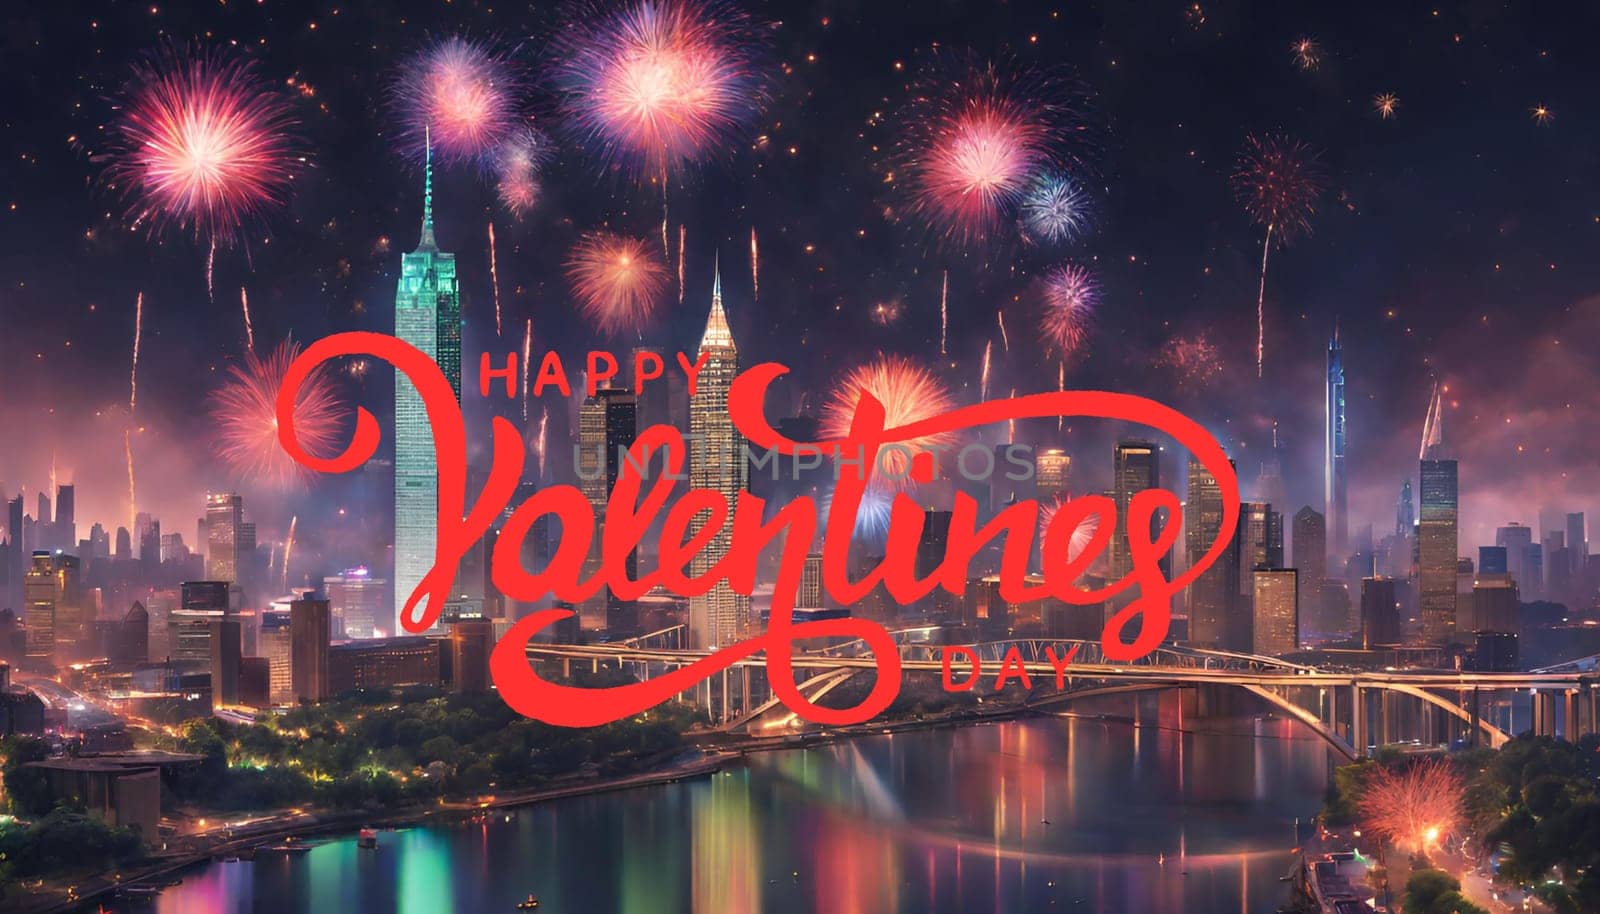 valentine's day. A city skyline at night with colorful lights and fireworks. The buildings are tall and modern, and the sky is dark and starry. c